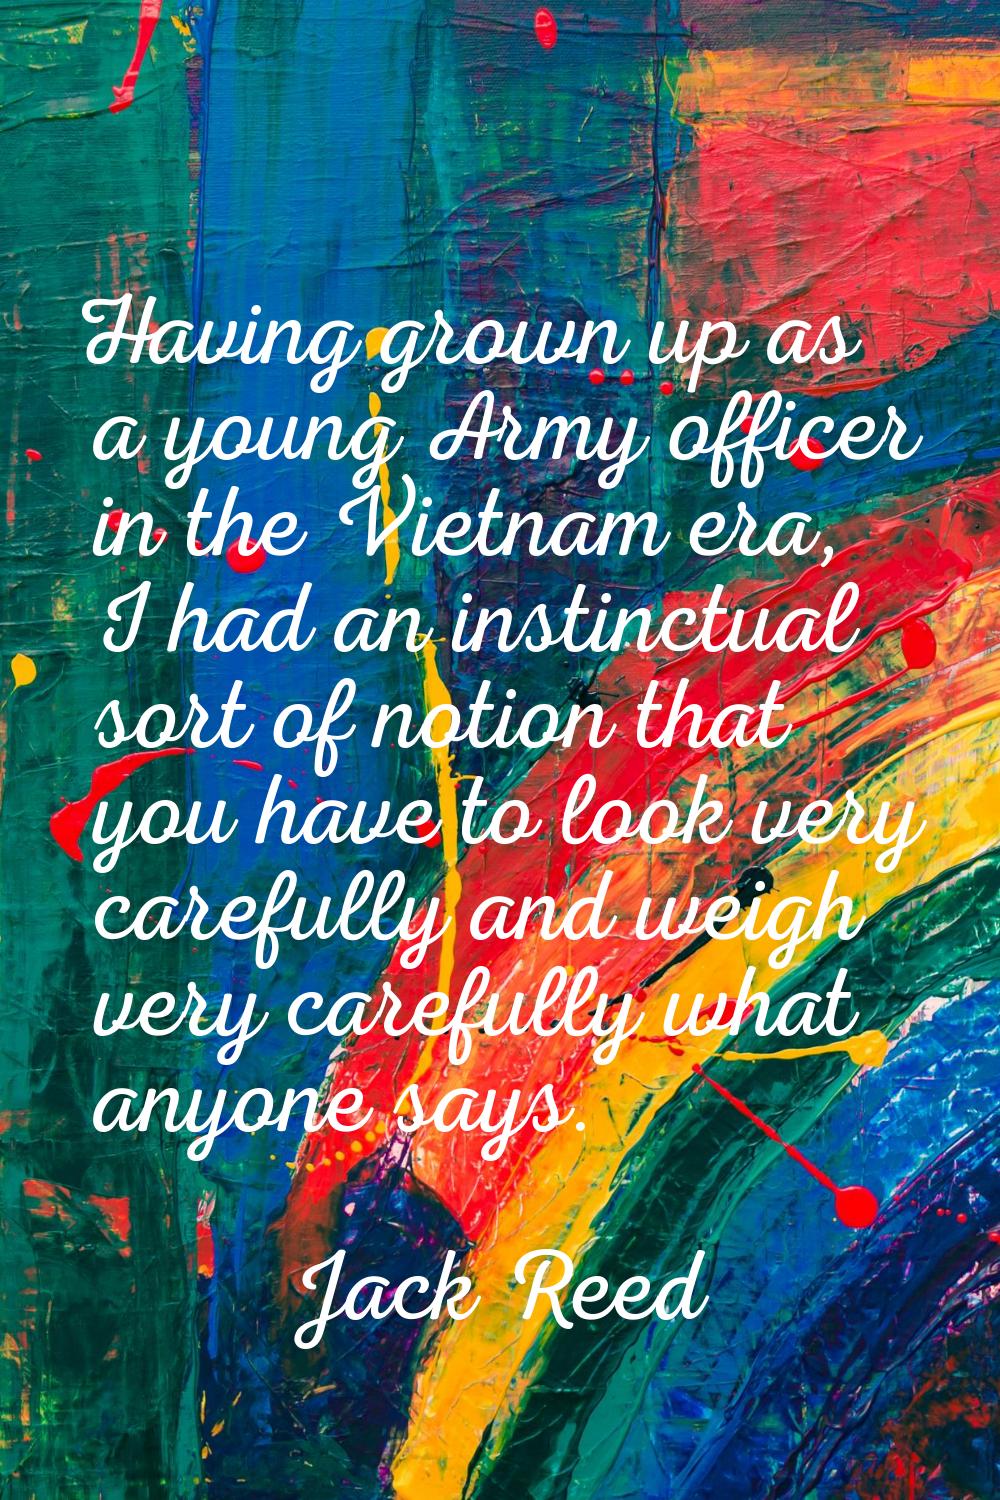 Having grown up as a young Army officer in the Vietnam era, I had an instinctual sort of notion tha